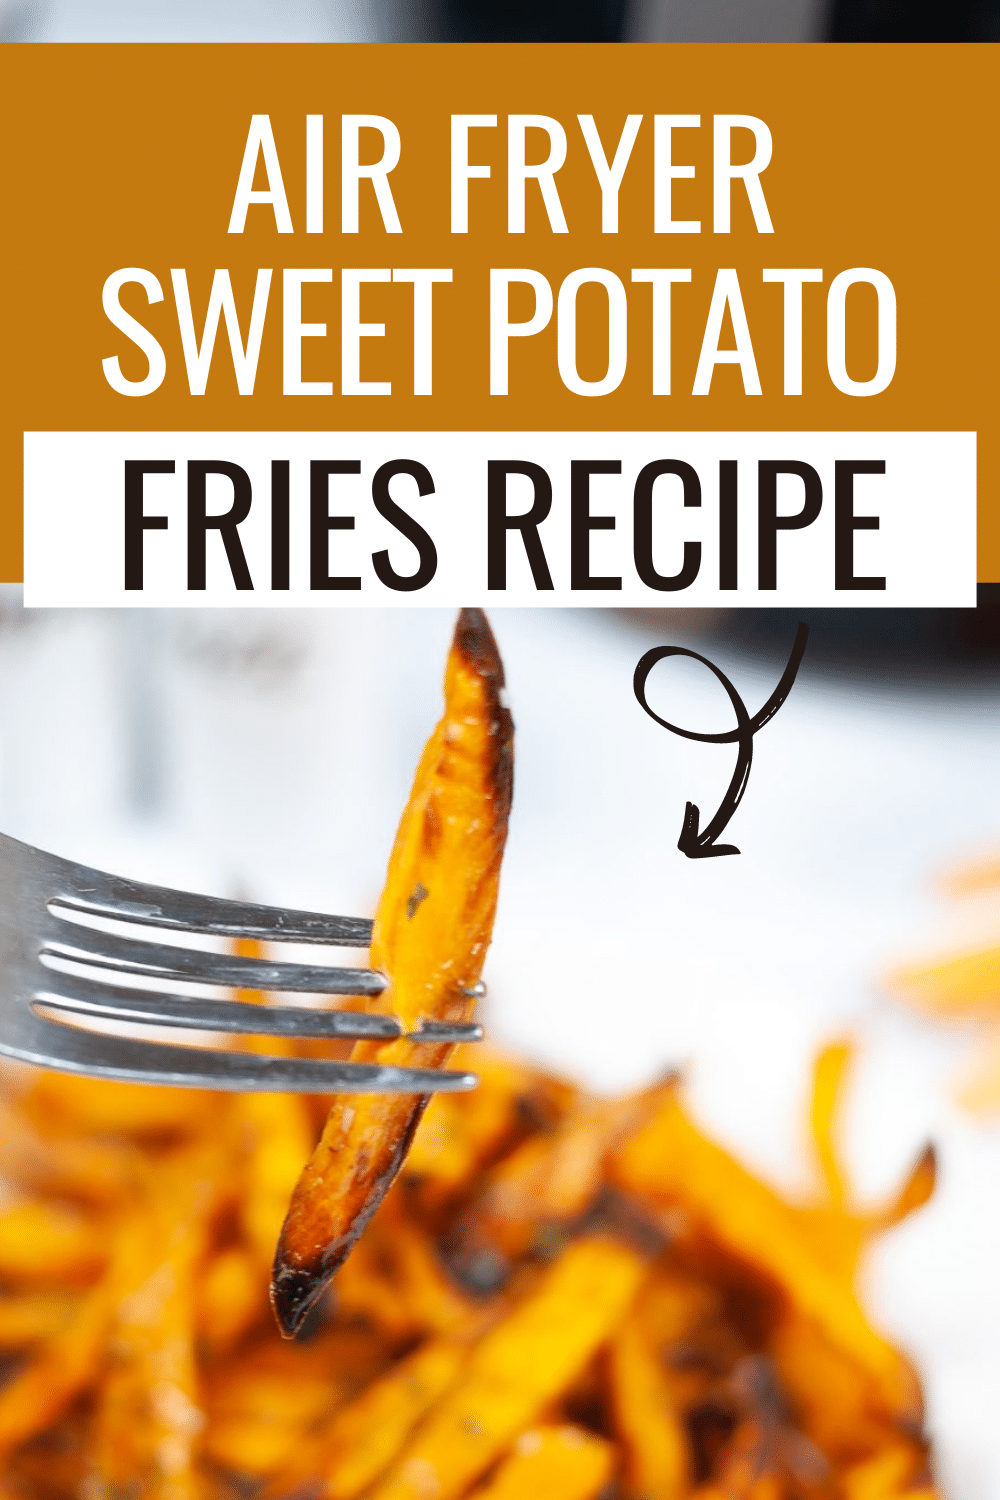 A piece of Air Fryer Potato Fries picked using a fork with a text above it saying "Air Fryer Potato Fries" and an arrow from the text to the piece of potato fries to highlight it.